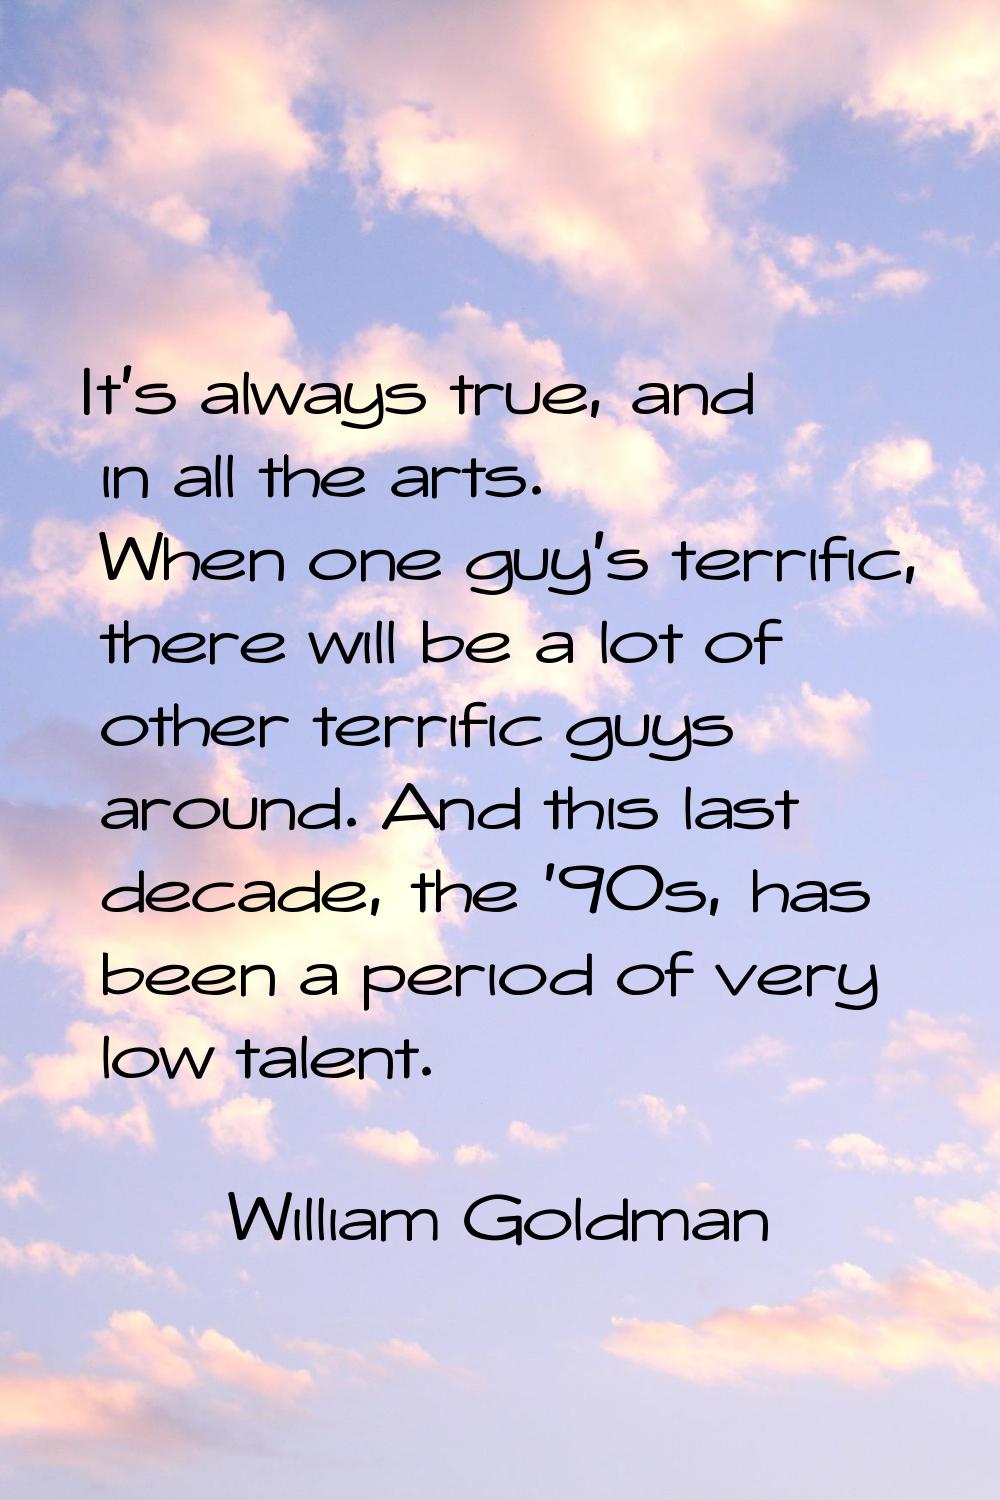 It's always true, and in all the arts. When one guy's terrific, there will be a lot of other terrif